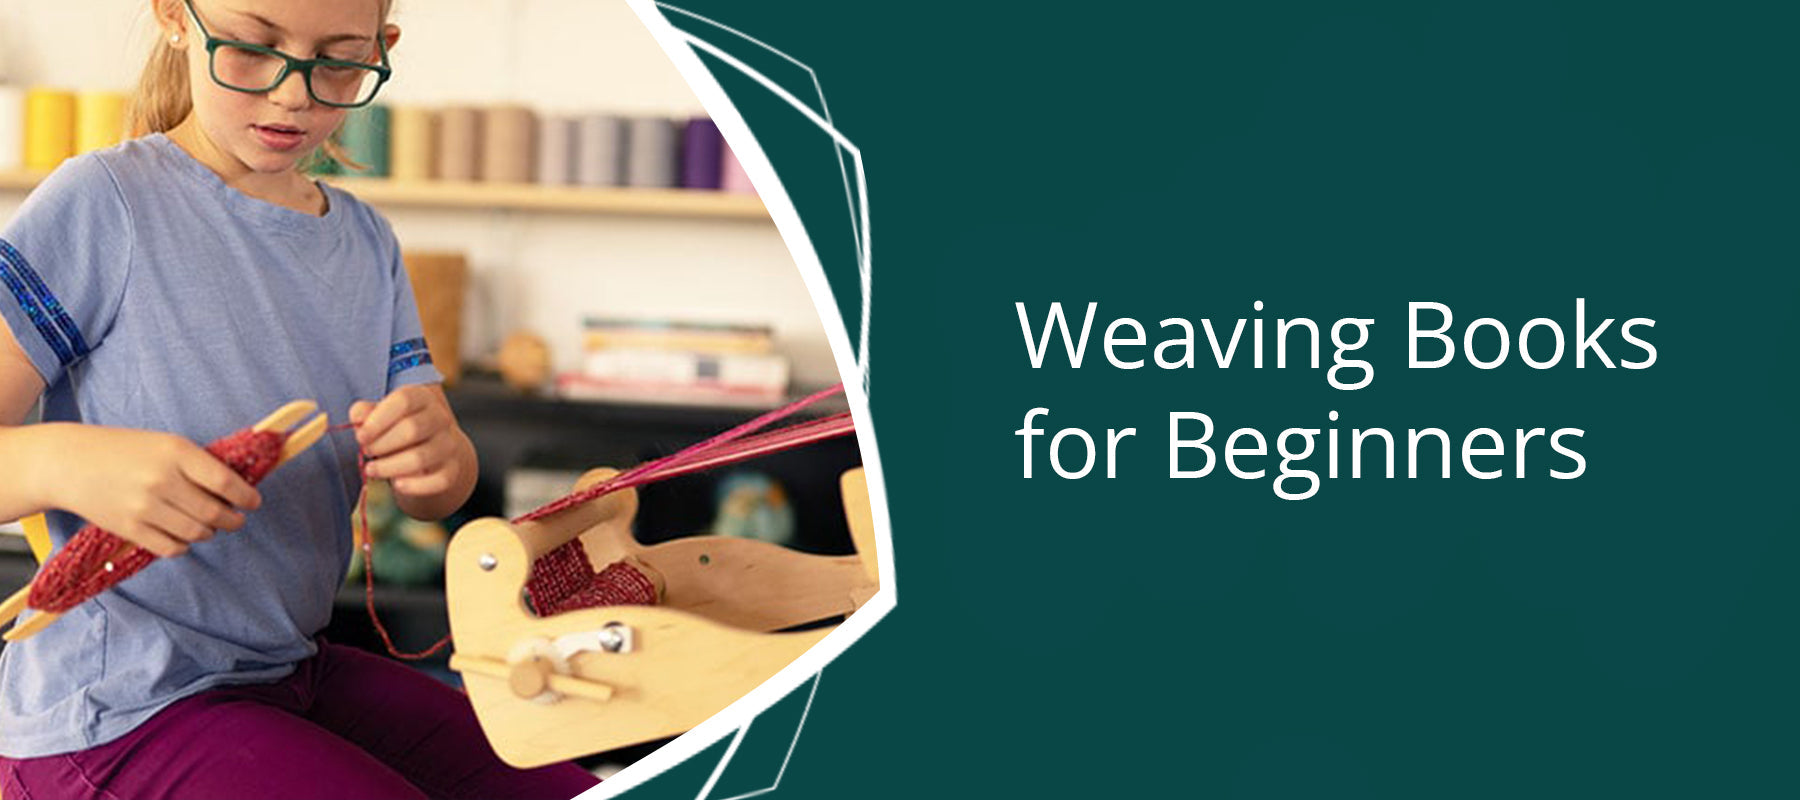 Weaving Books for Beginners - Thread Collective Australia